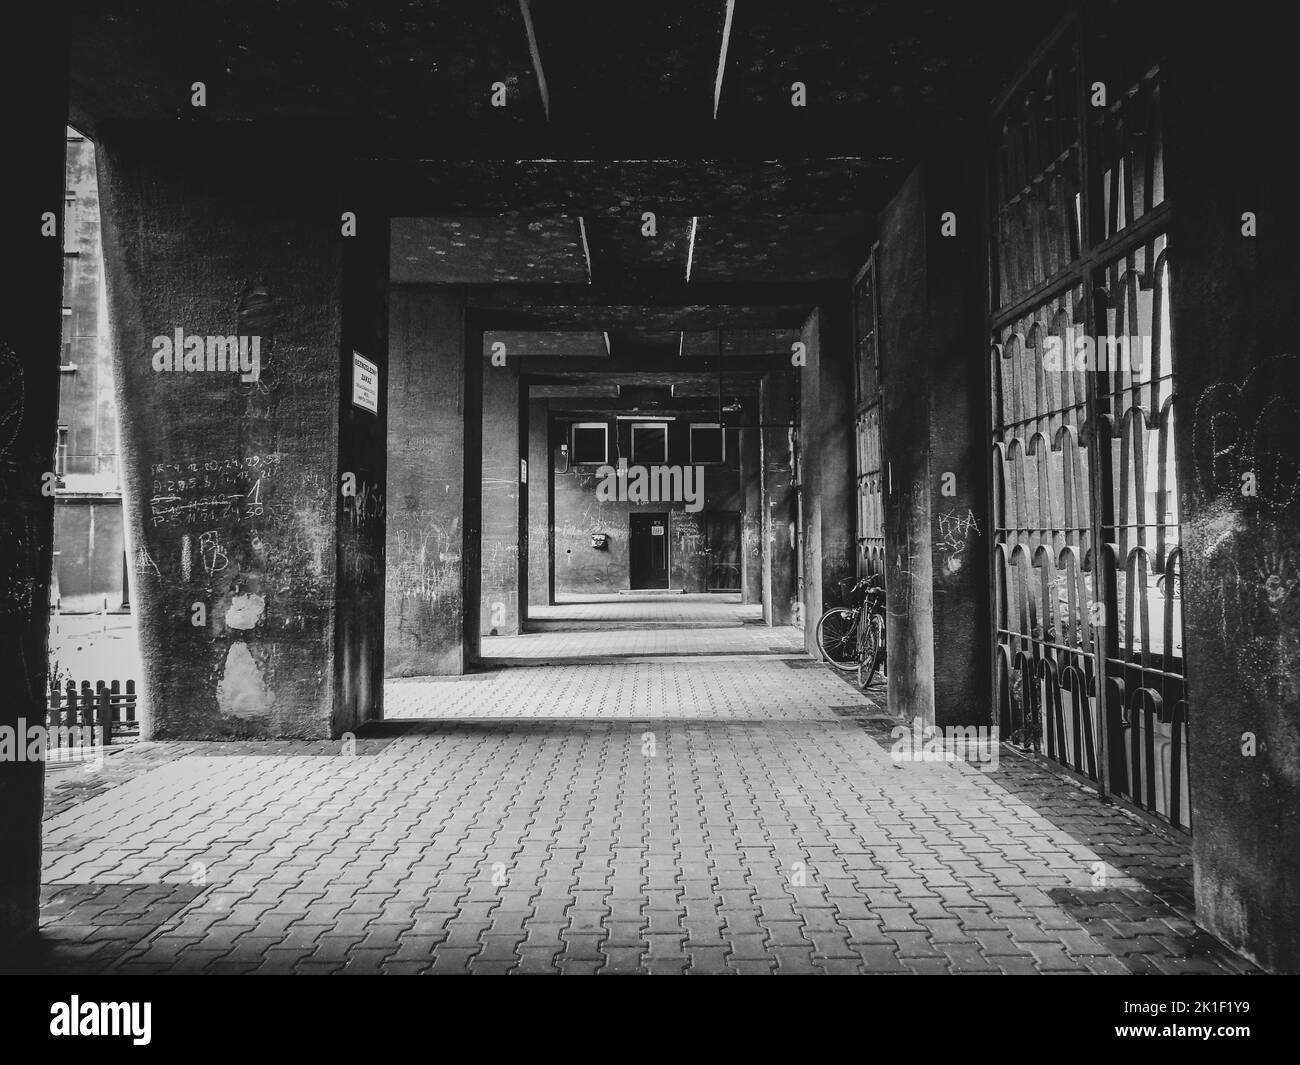 A covered pedestrian passage under a modern apartment building in black and white. Stock Photo